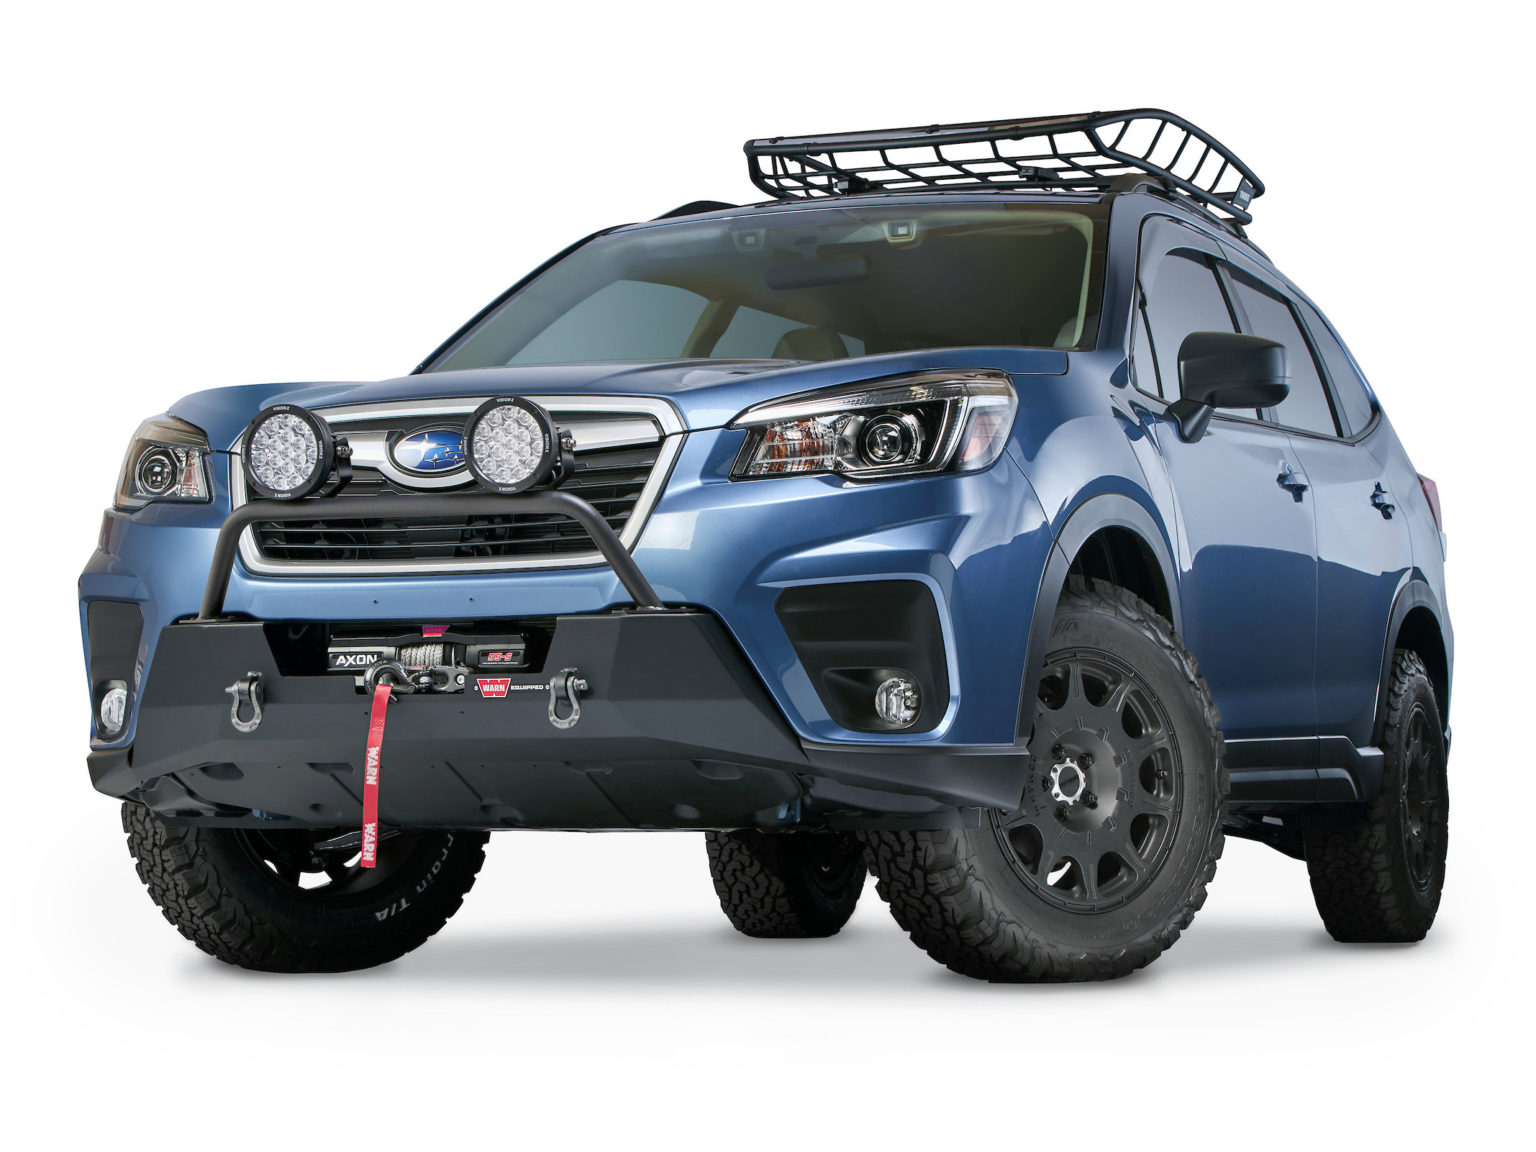 Warn has introduced new low-profile mounting systems for the Subaru Forester and Outback.